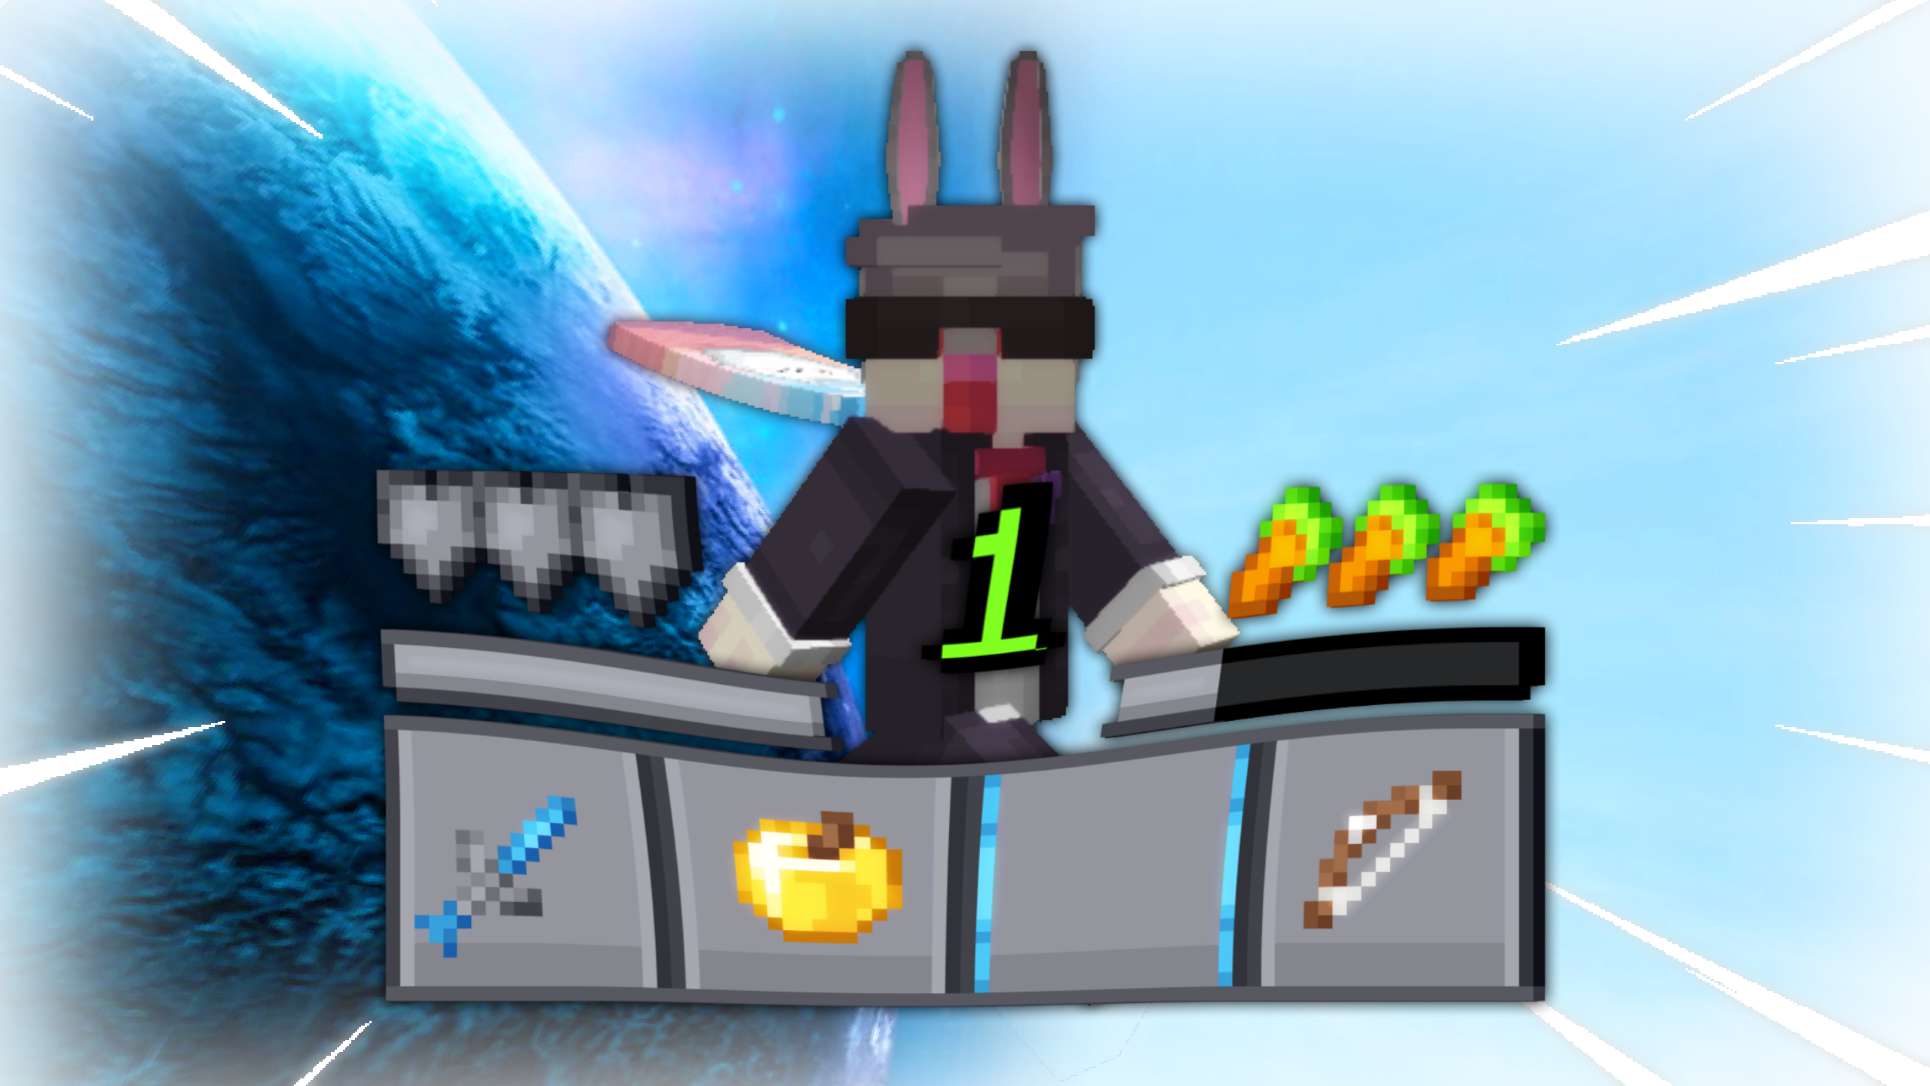 Superior 16 by Boss Bunny on PvPRP